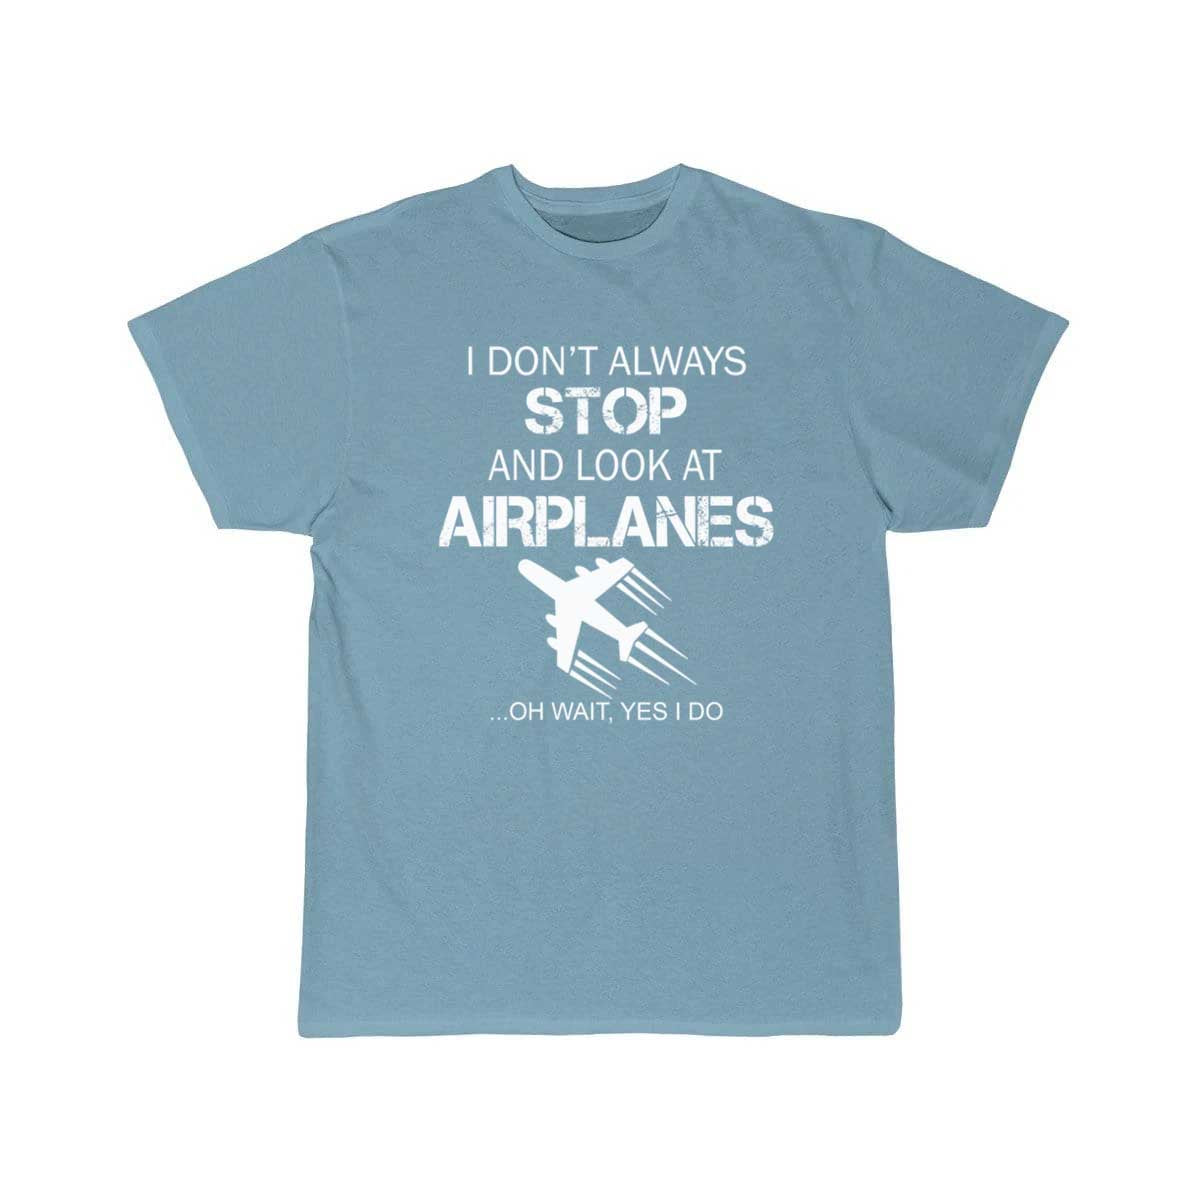 I DON'T ALWAYS STOP AND LOOK AT AIRPLANE T-SHIRT THE AV8R